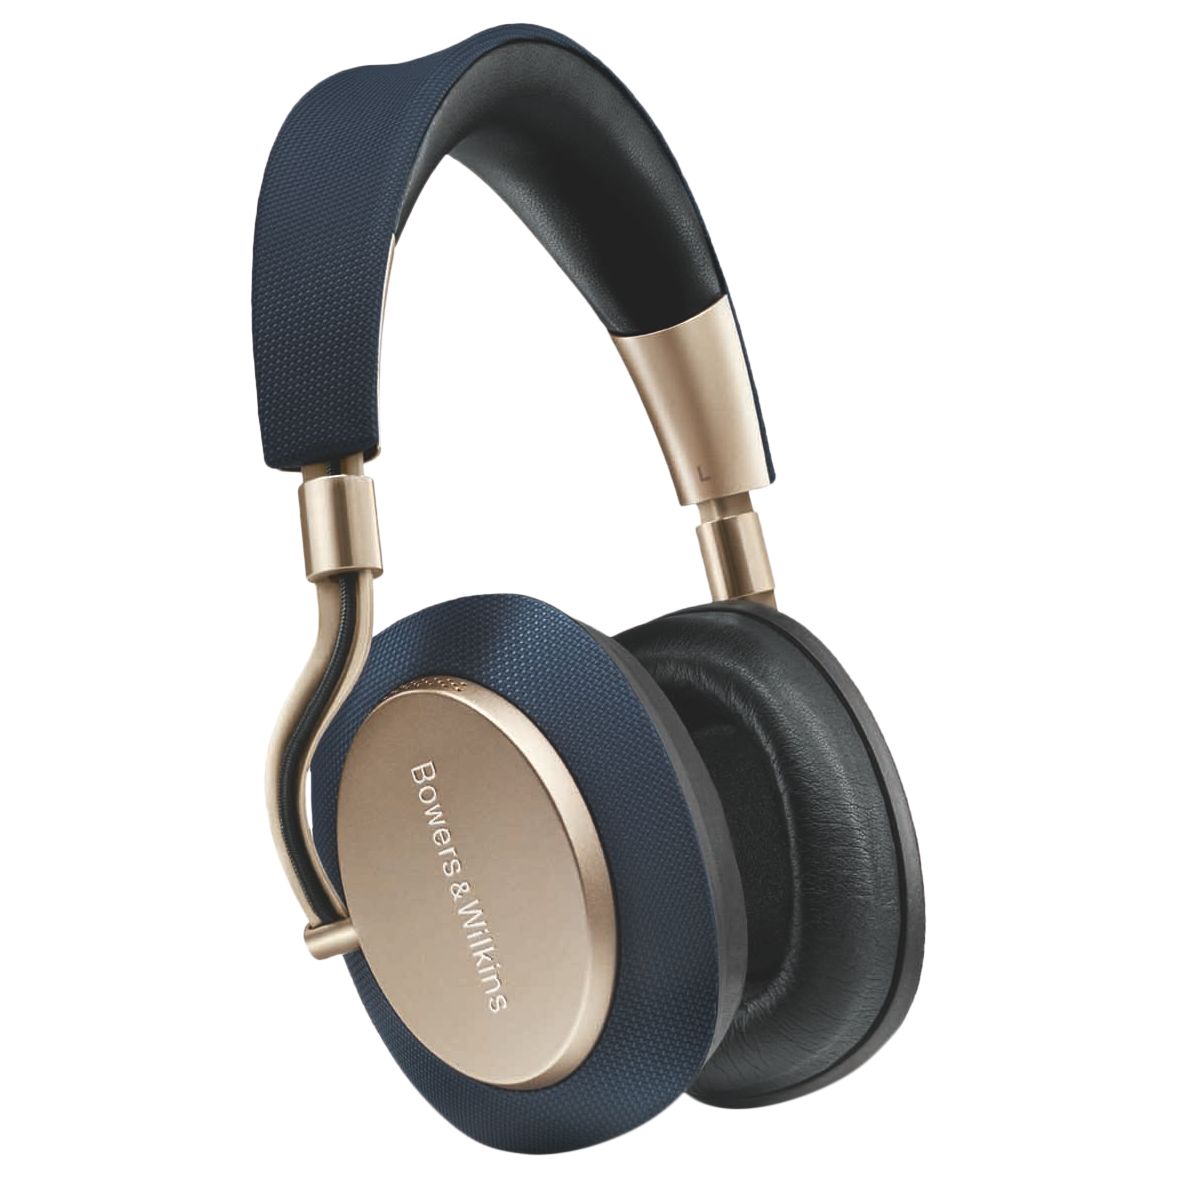 Bowers & Wilkins PX Headphones - Top 5 Picks For Your Hand luggage